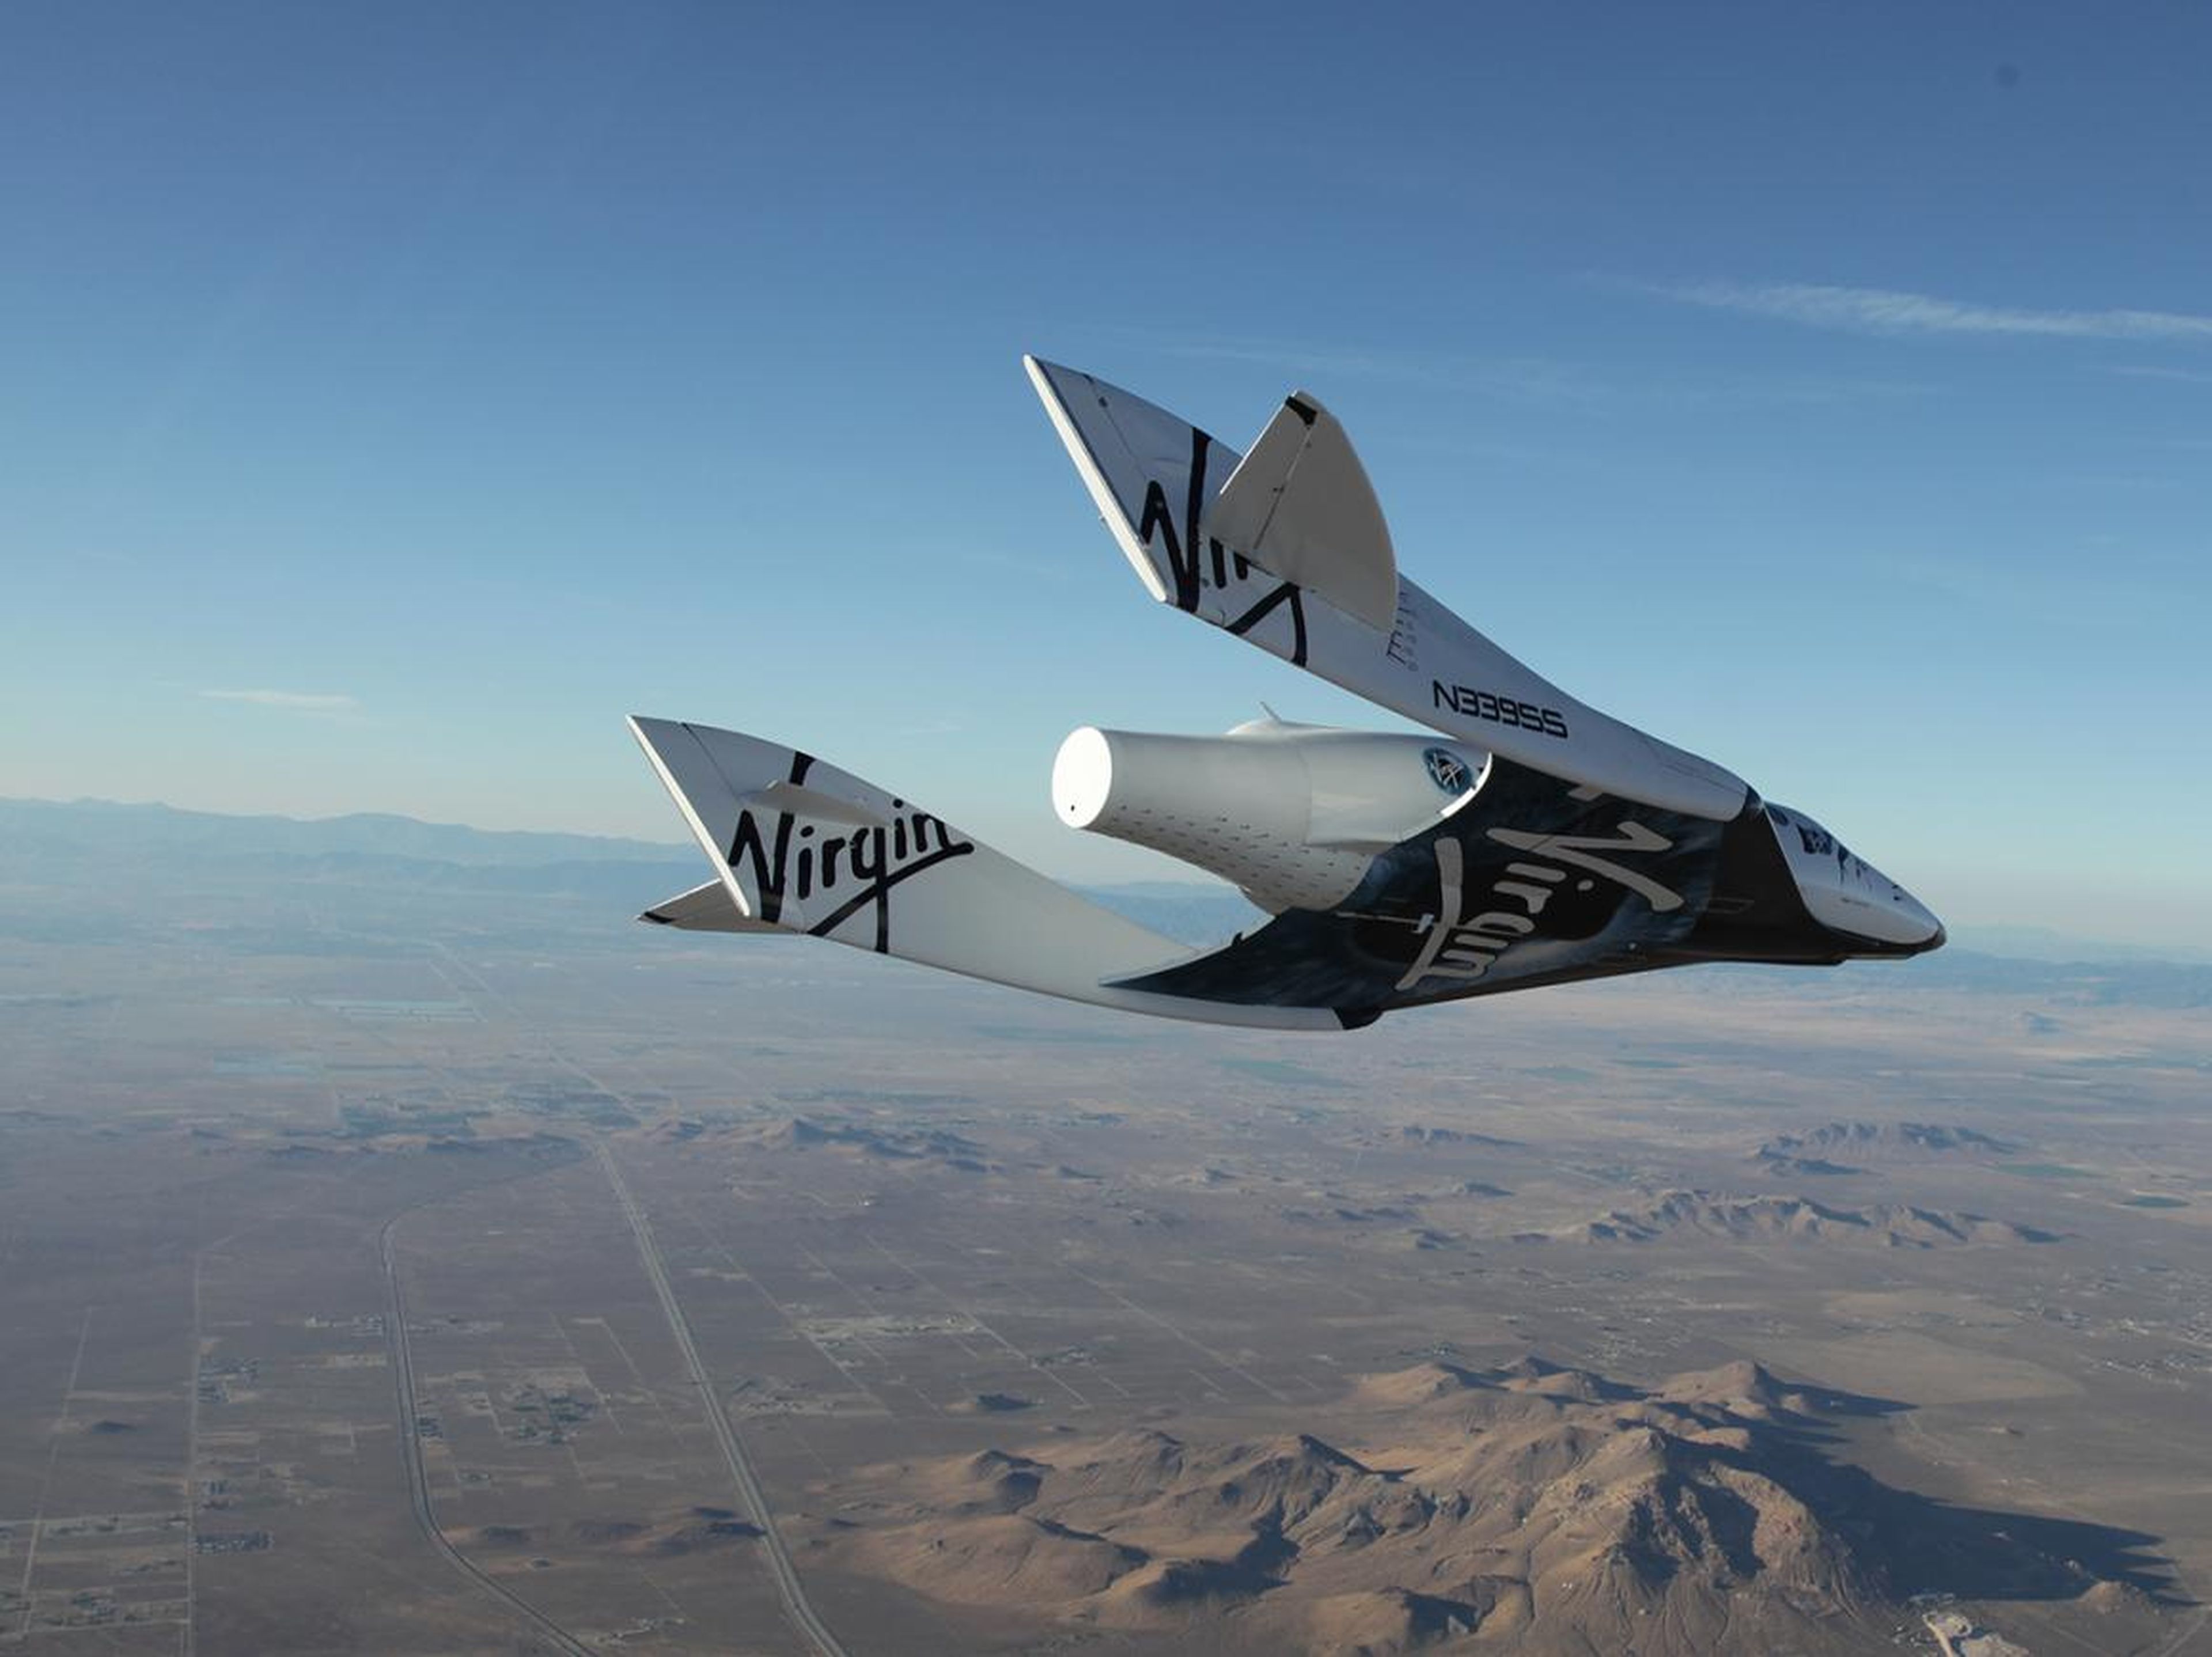 Celebrities Ashton Kutcher and Katy Perry are among those who have reportedly bought tickets for a space tour aboard Richard Branson's Virgin Galactic spacecraft.